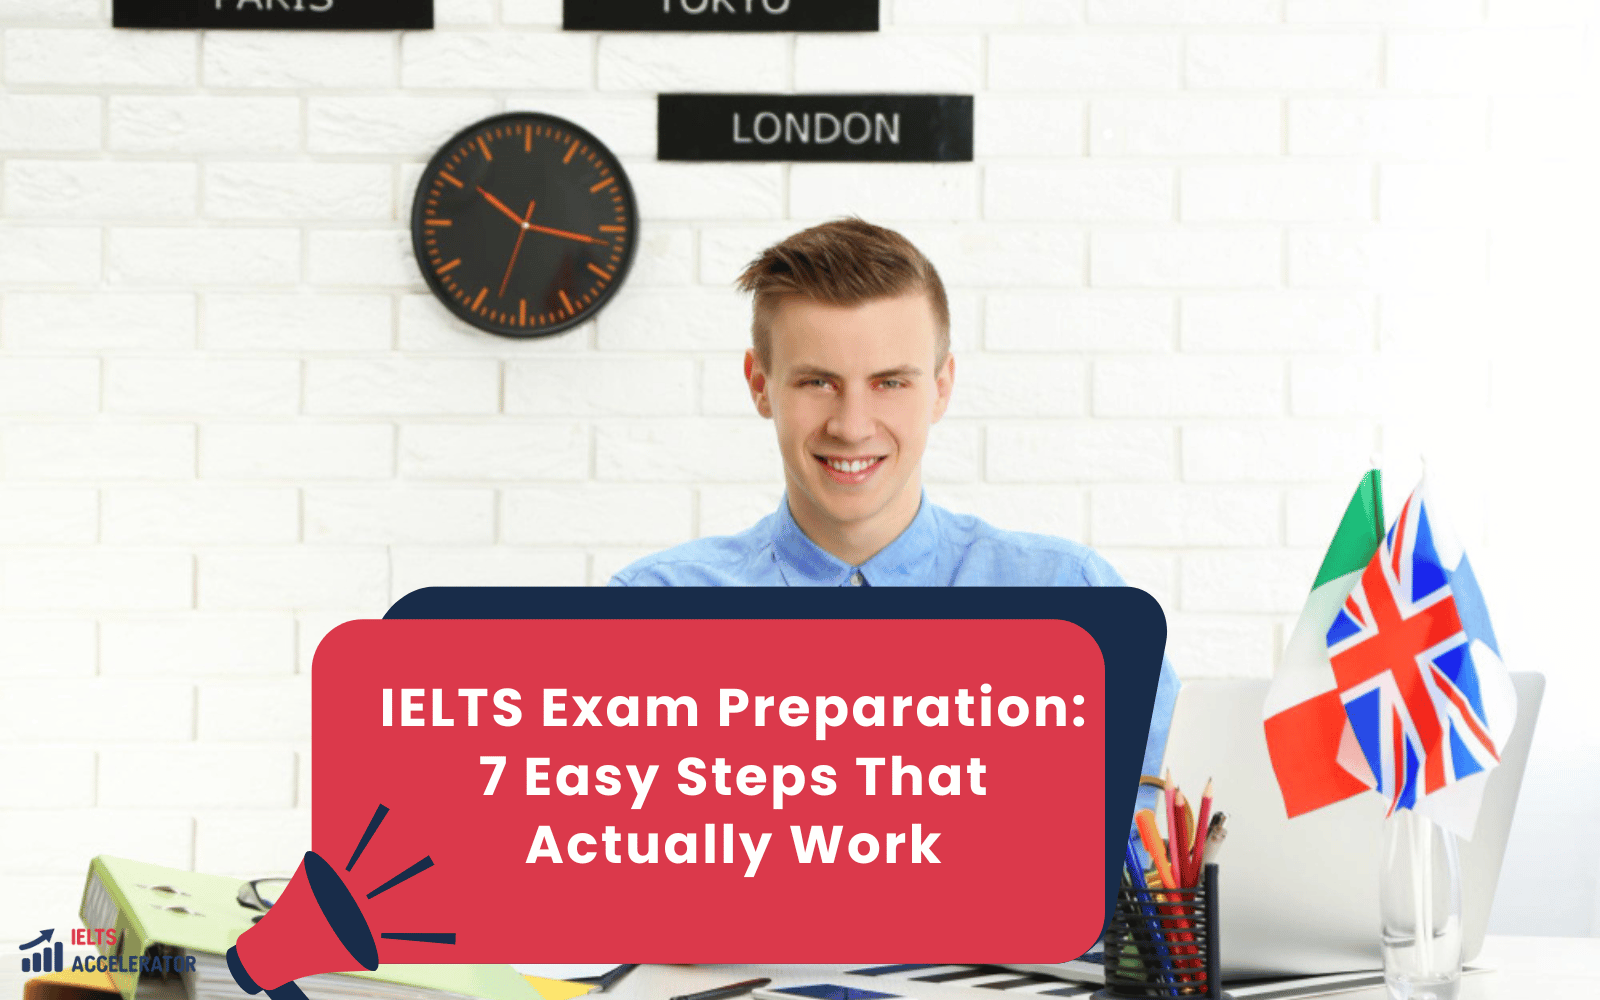 IELTS Exam Preparation 7 Easy Steps That Actually Work